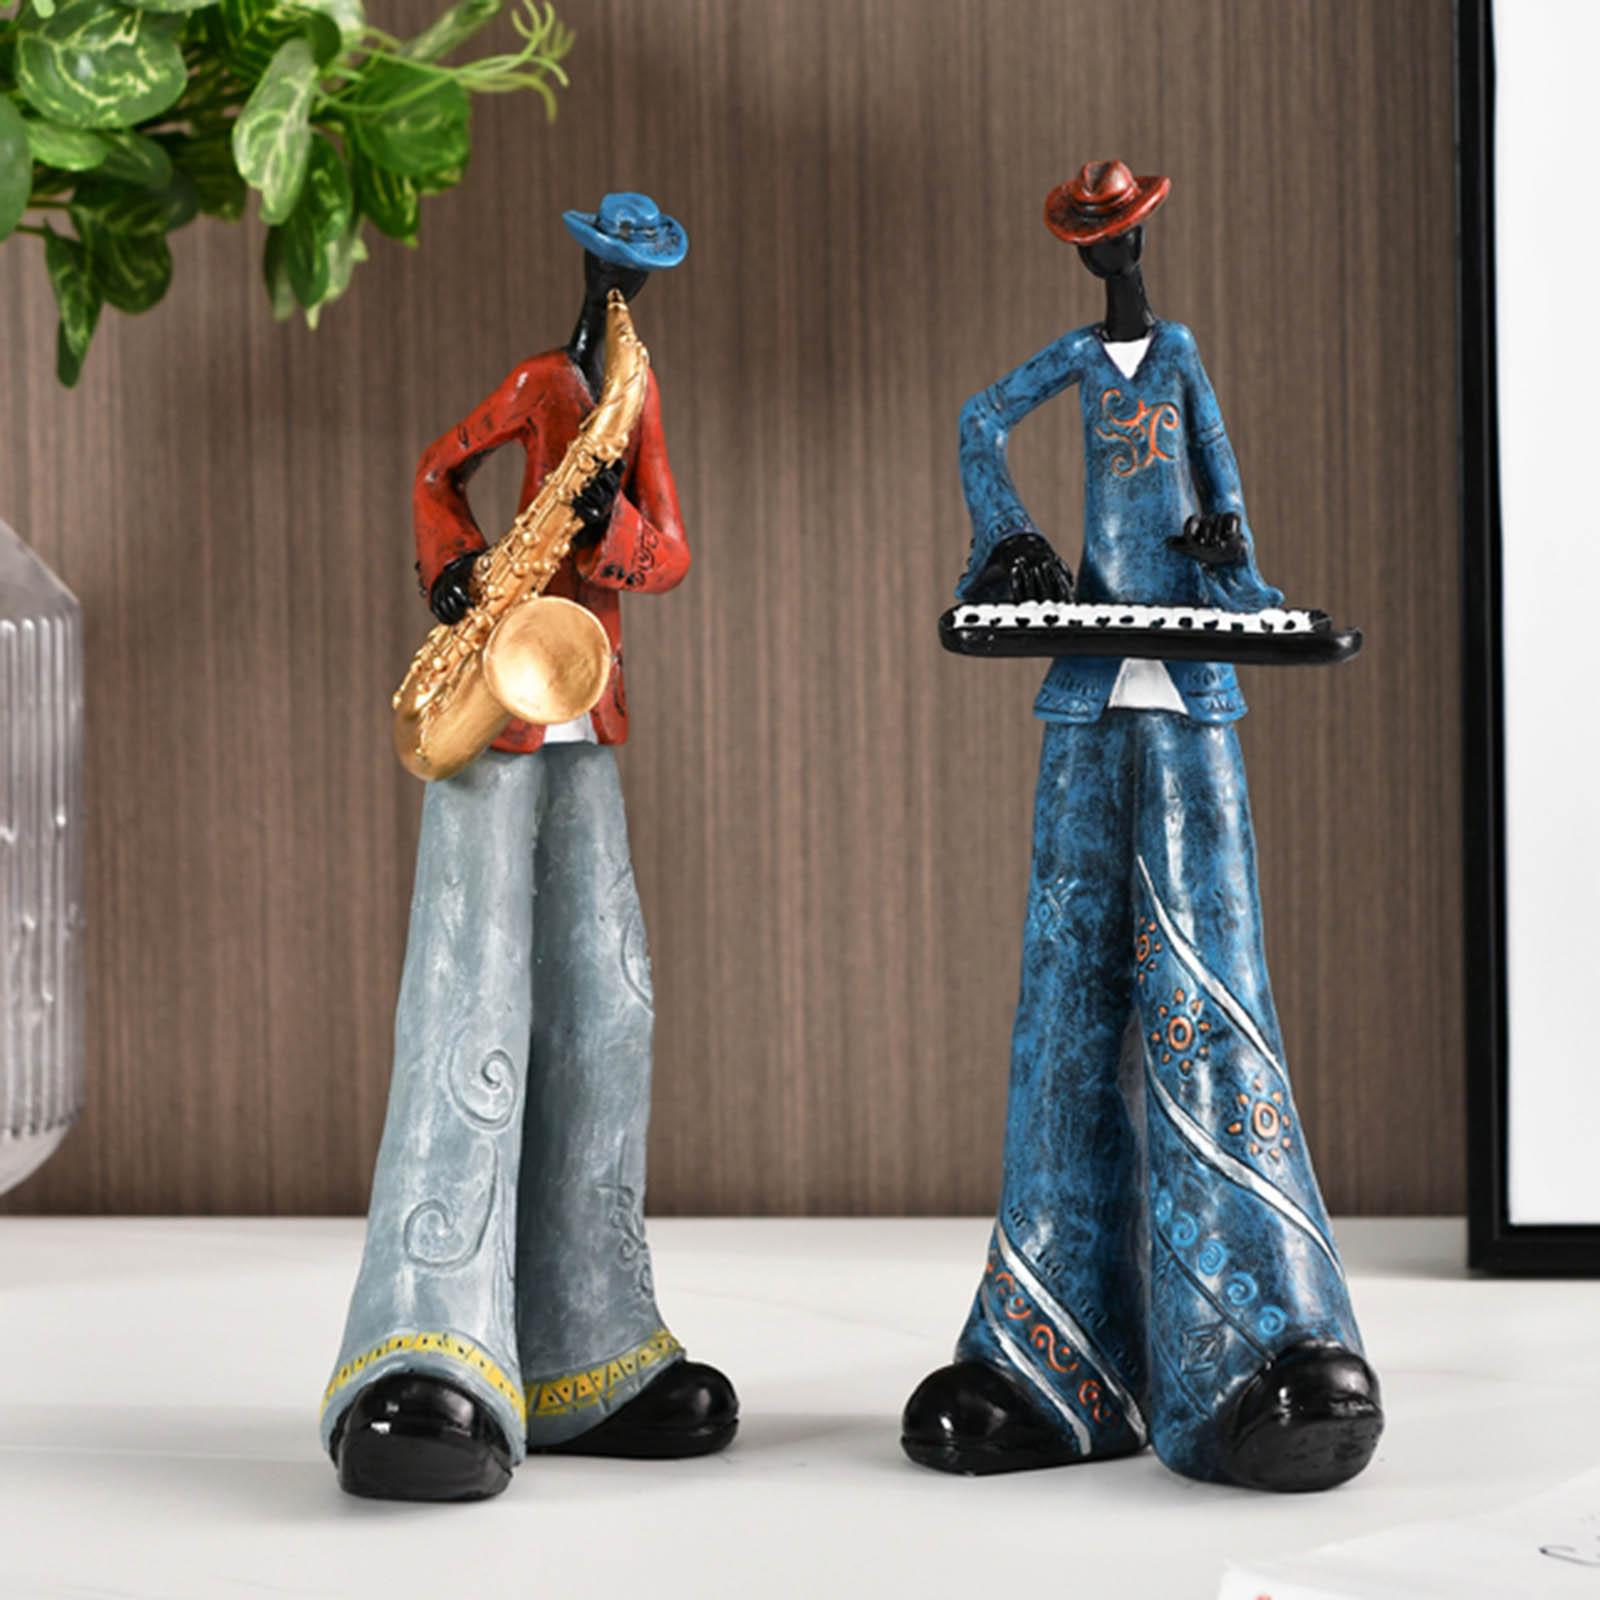 Rock Band Resin Statue Music Art Character Model Figurines 11x28cm Piano